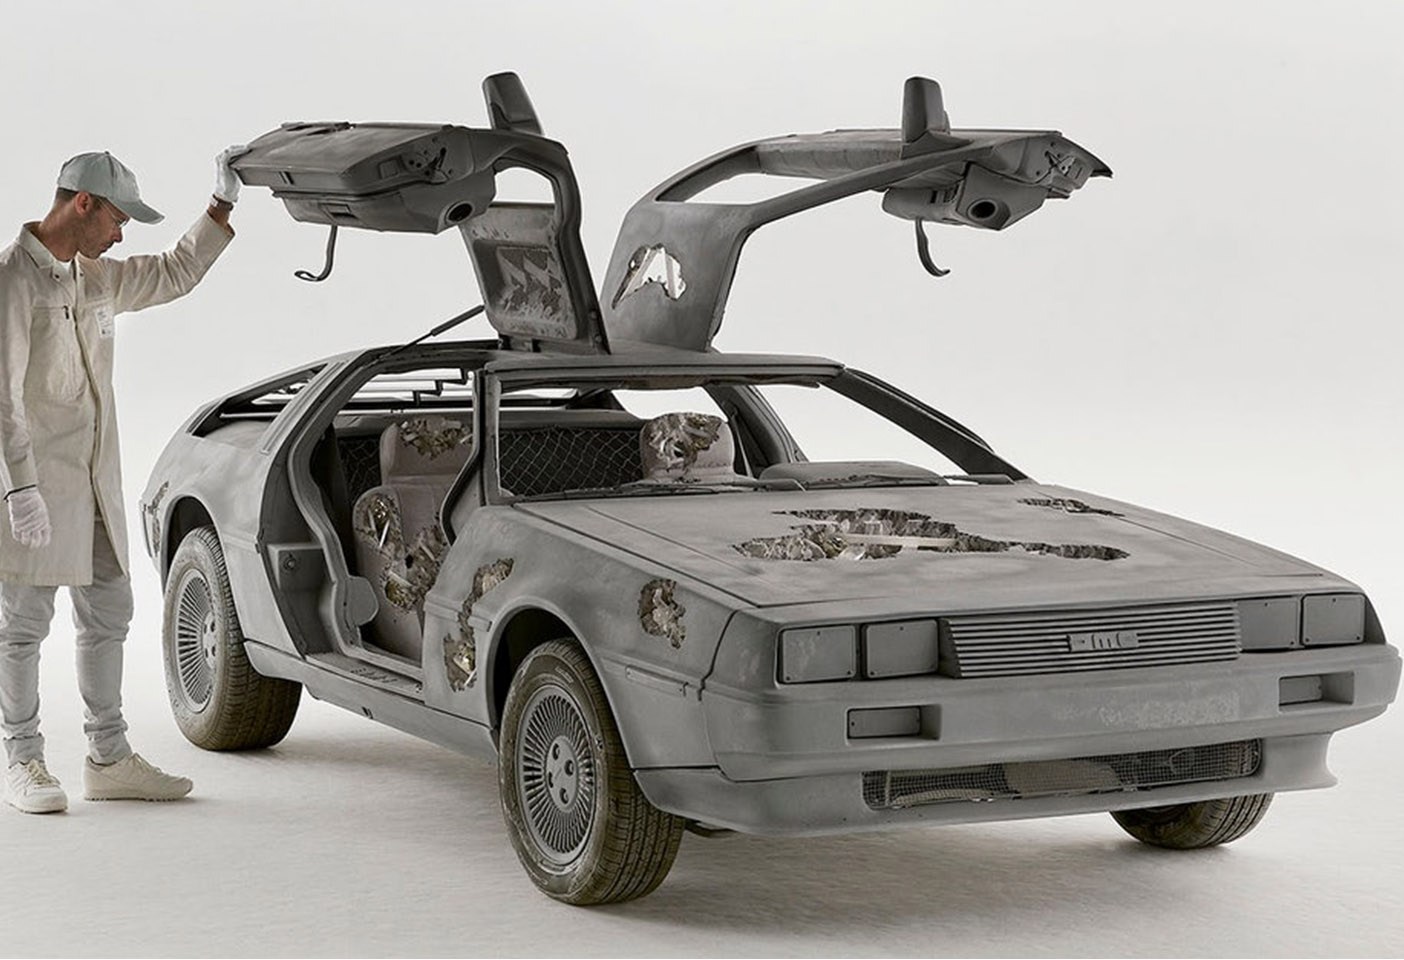 The 2018 installation 'Back to the Future' by artist Daniel Arsham is 'a showroom of relics' that includes a 1981 DeLorean. Photo c/o Saifuddin Johar.